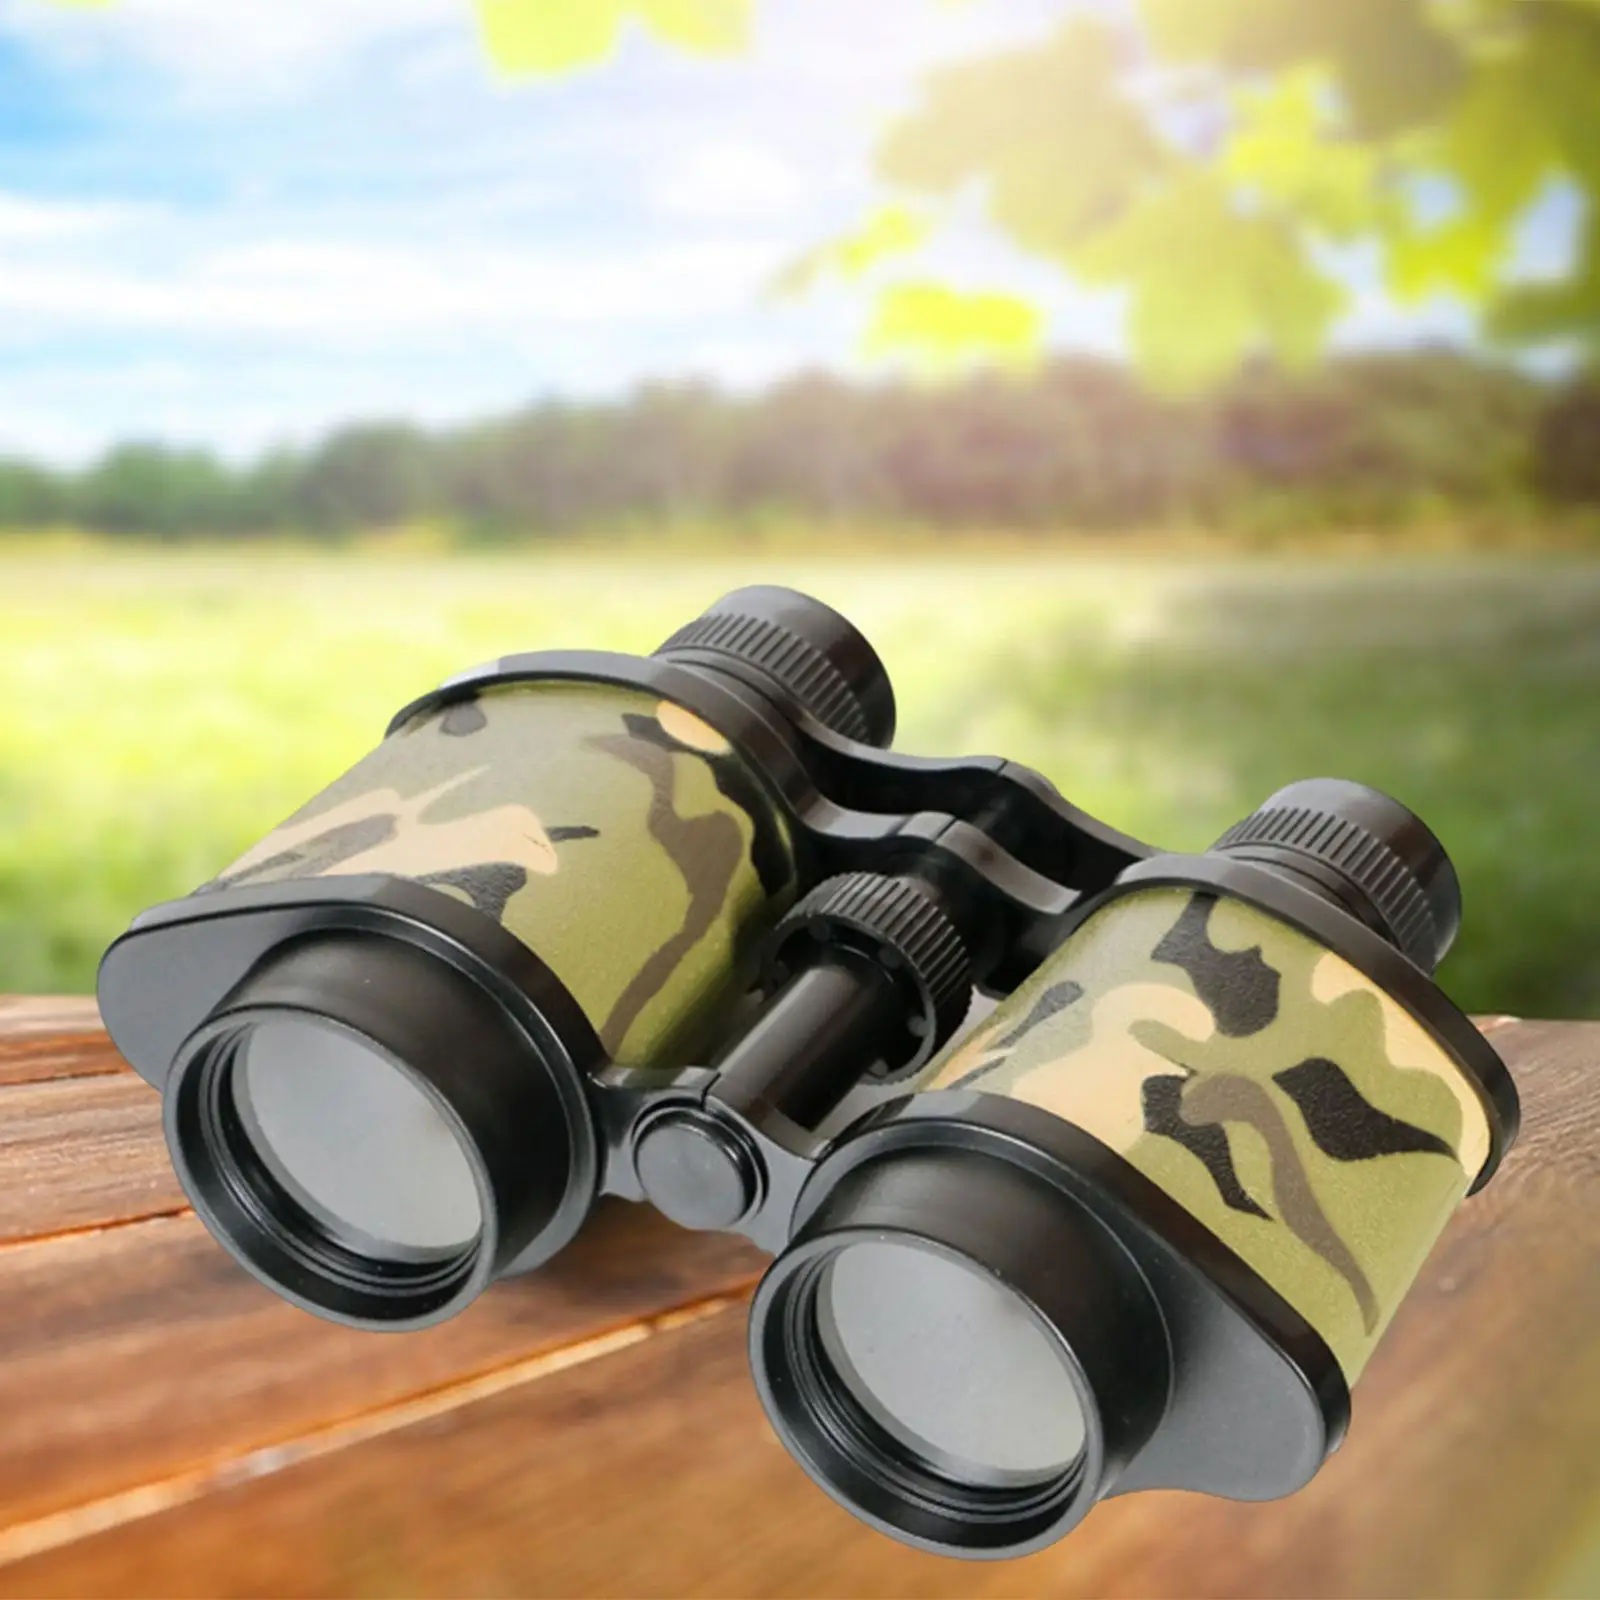 Kids Binoculars Toy 8x30 Educational Children Magnification Toy for Outdoor Activity Party Favors Insights Presents Exploration